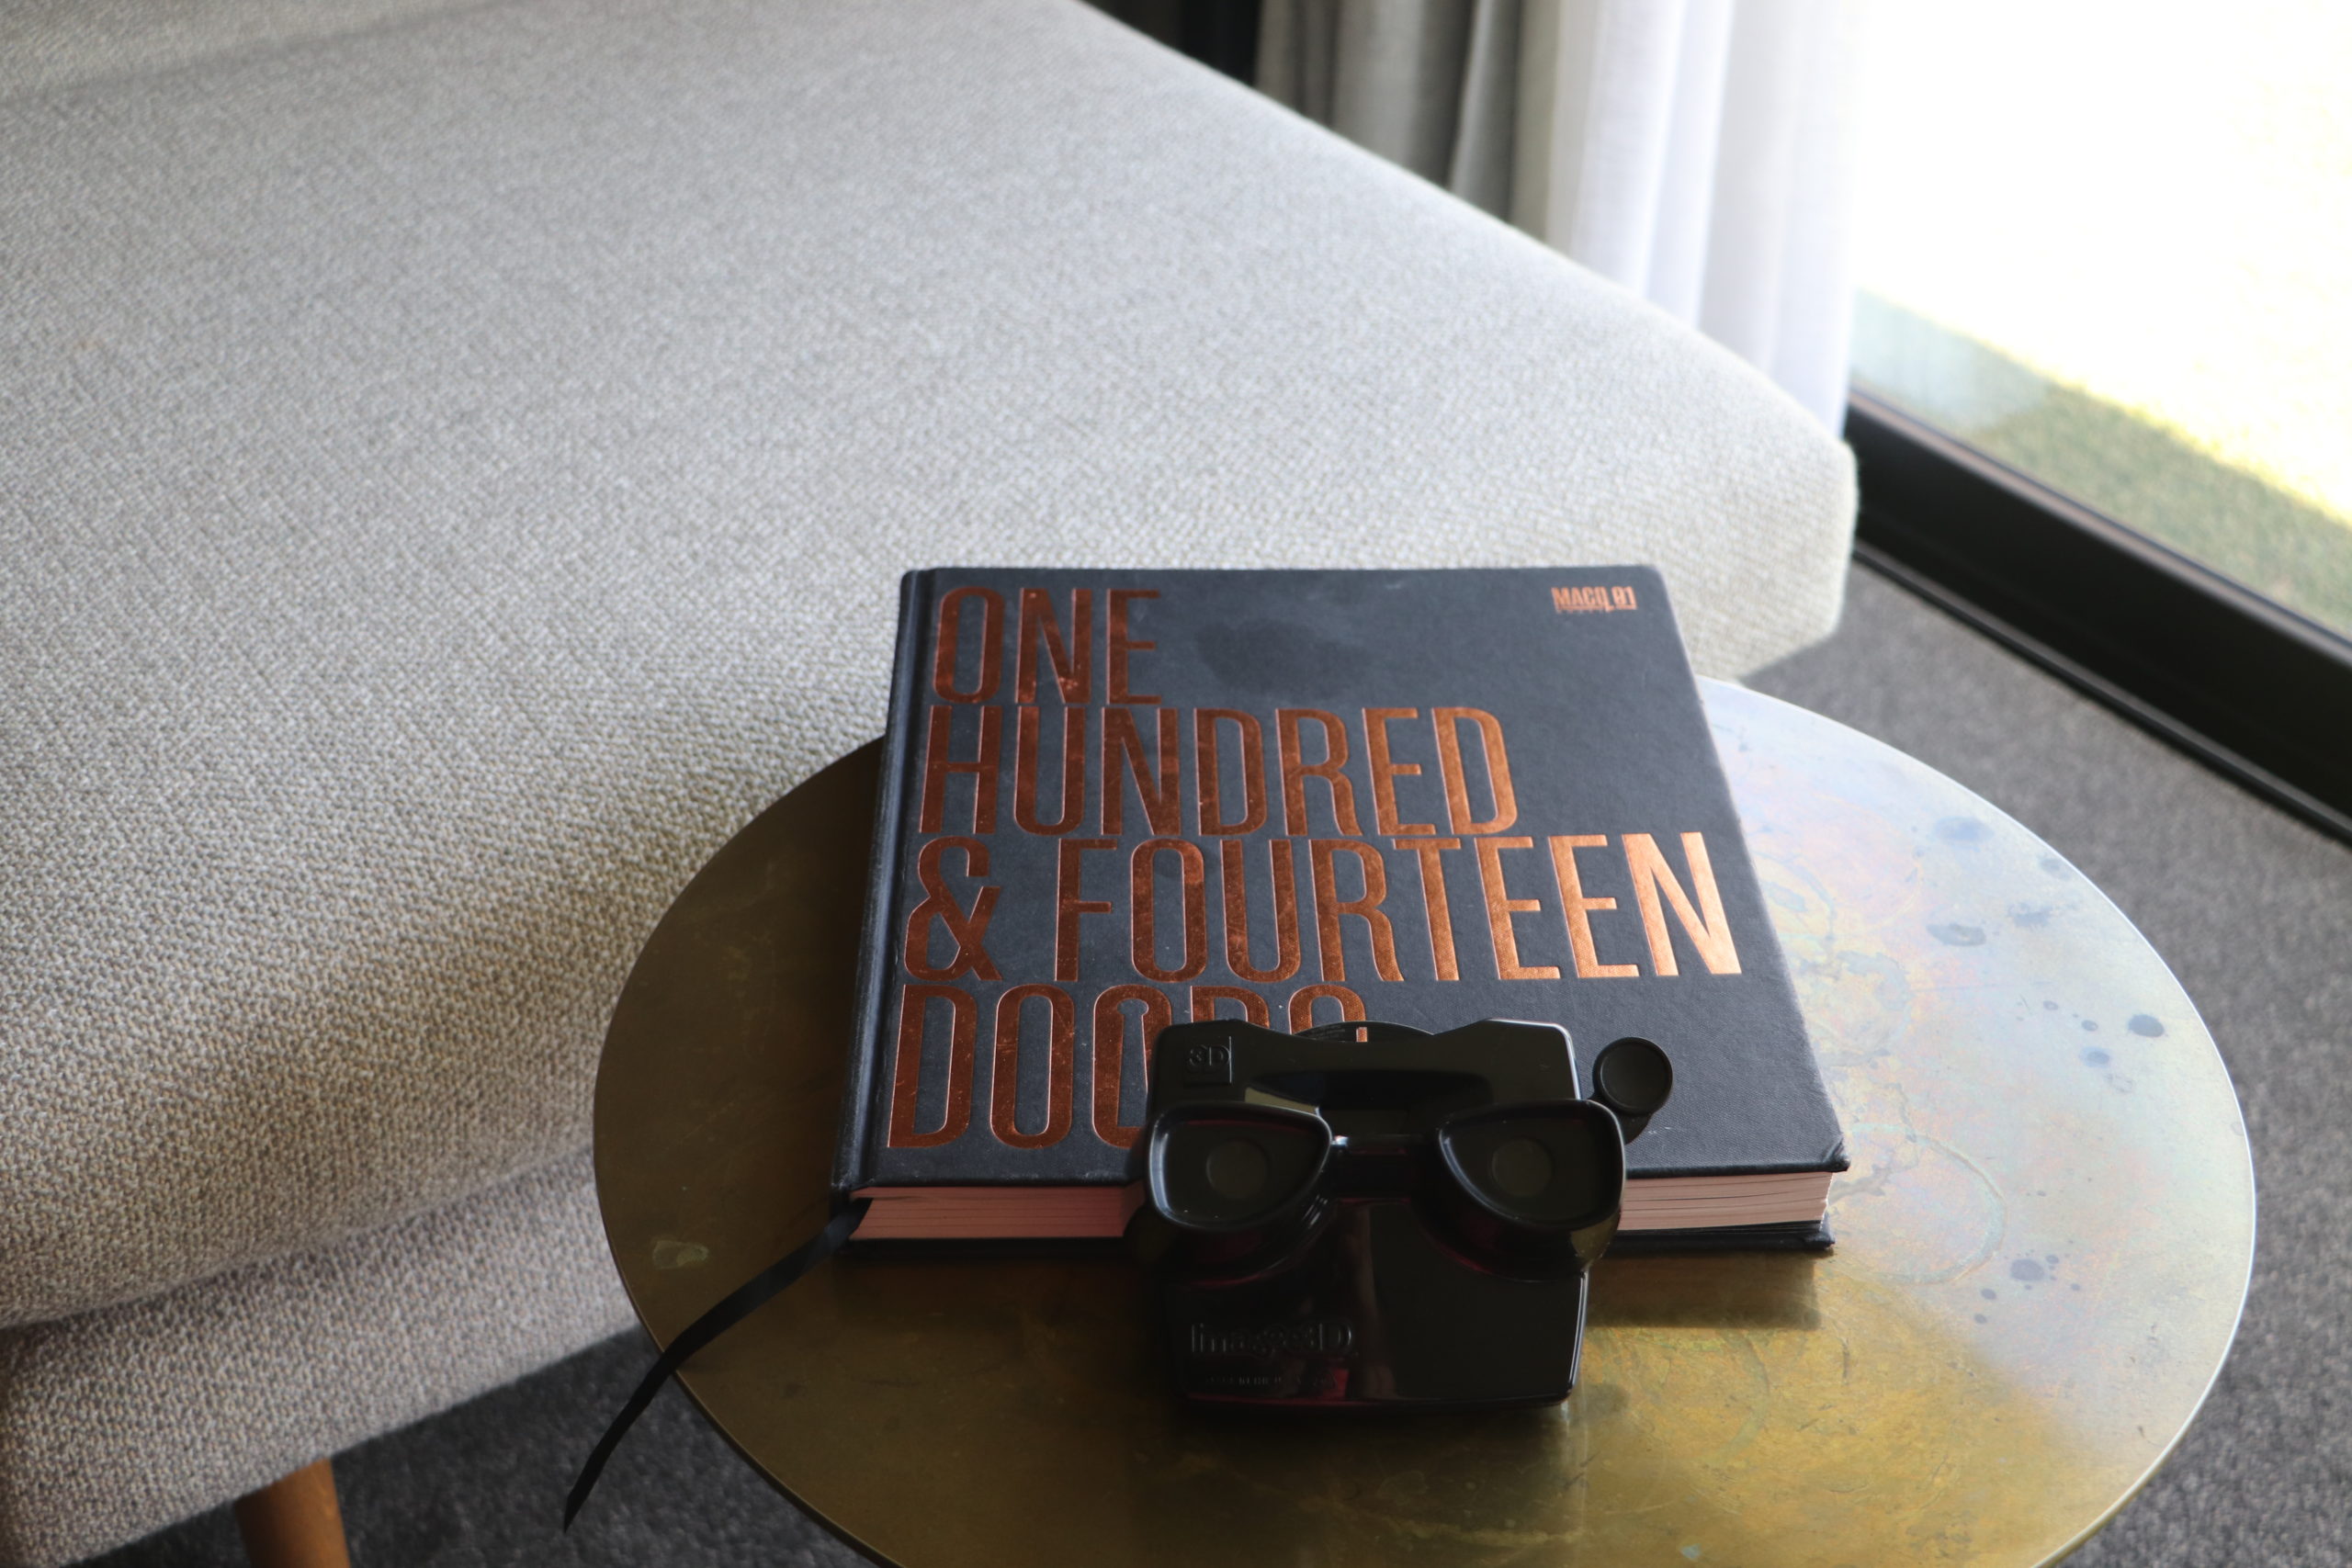 Viewfinder and hotel book inside MACq 01 hotel by Katrina Holden